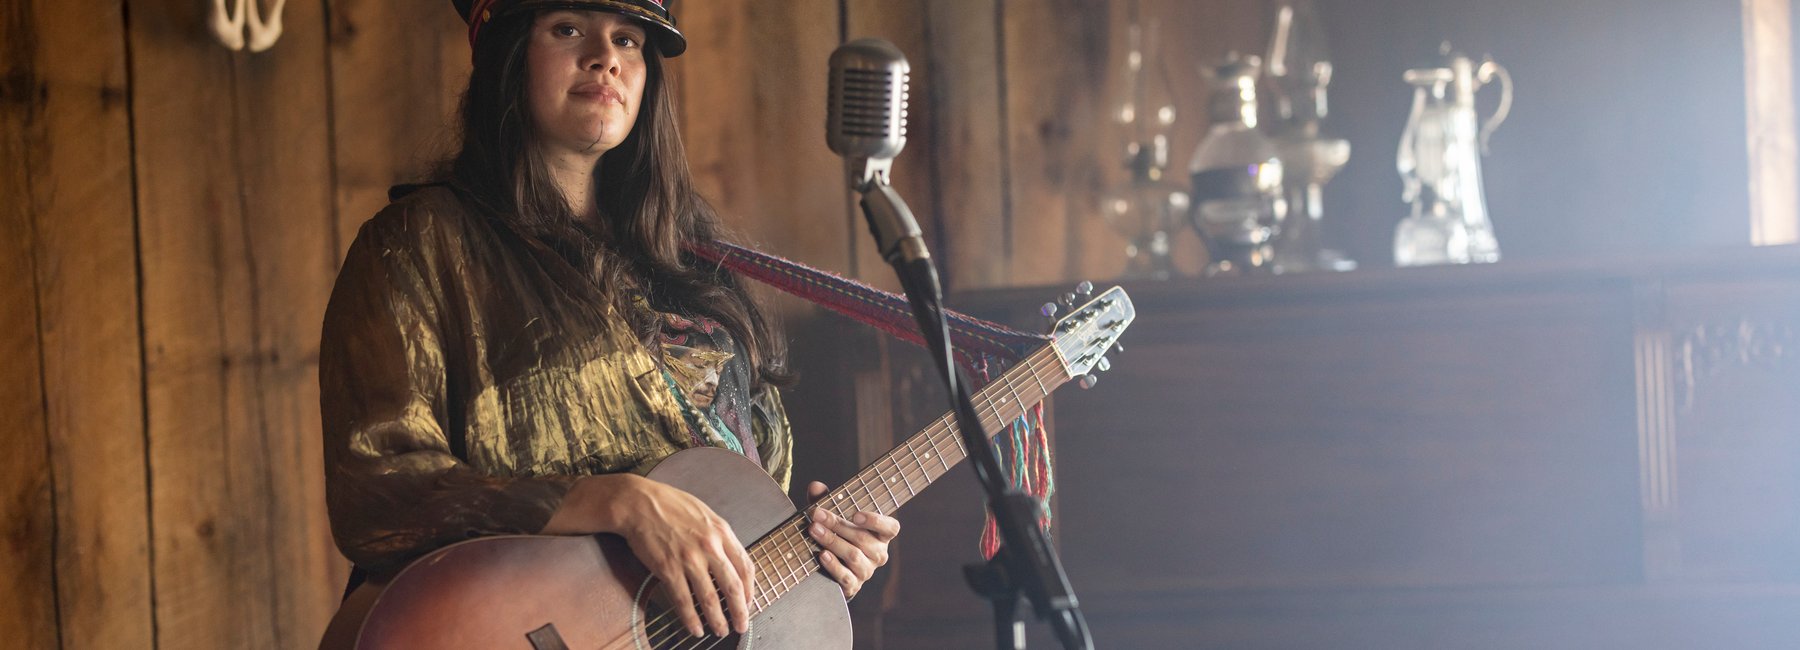 Alberta musician Bebe Buckskin stands with a guitar and microphone